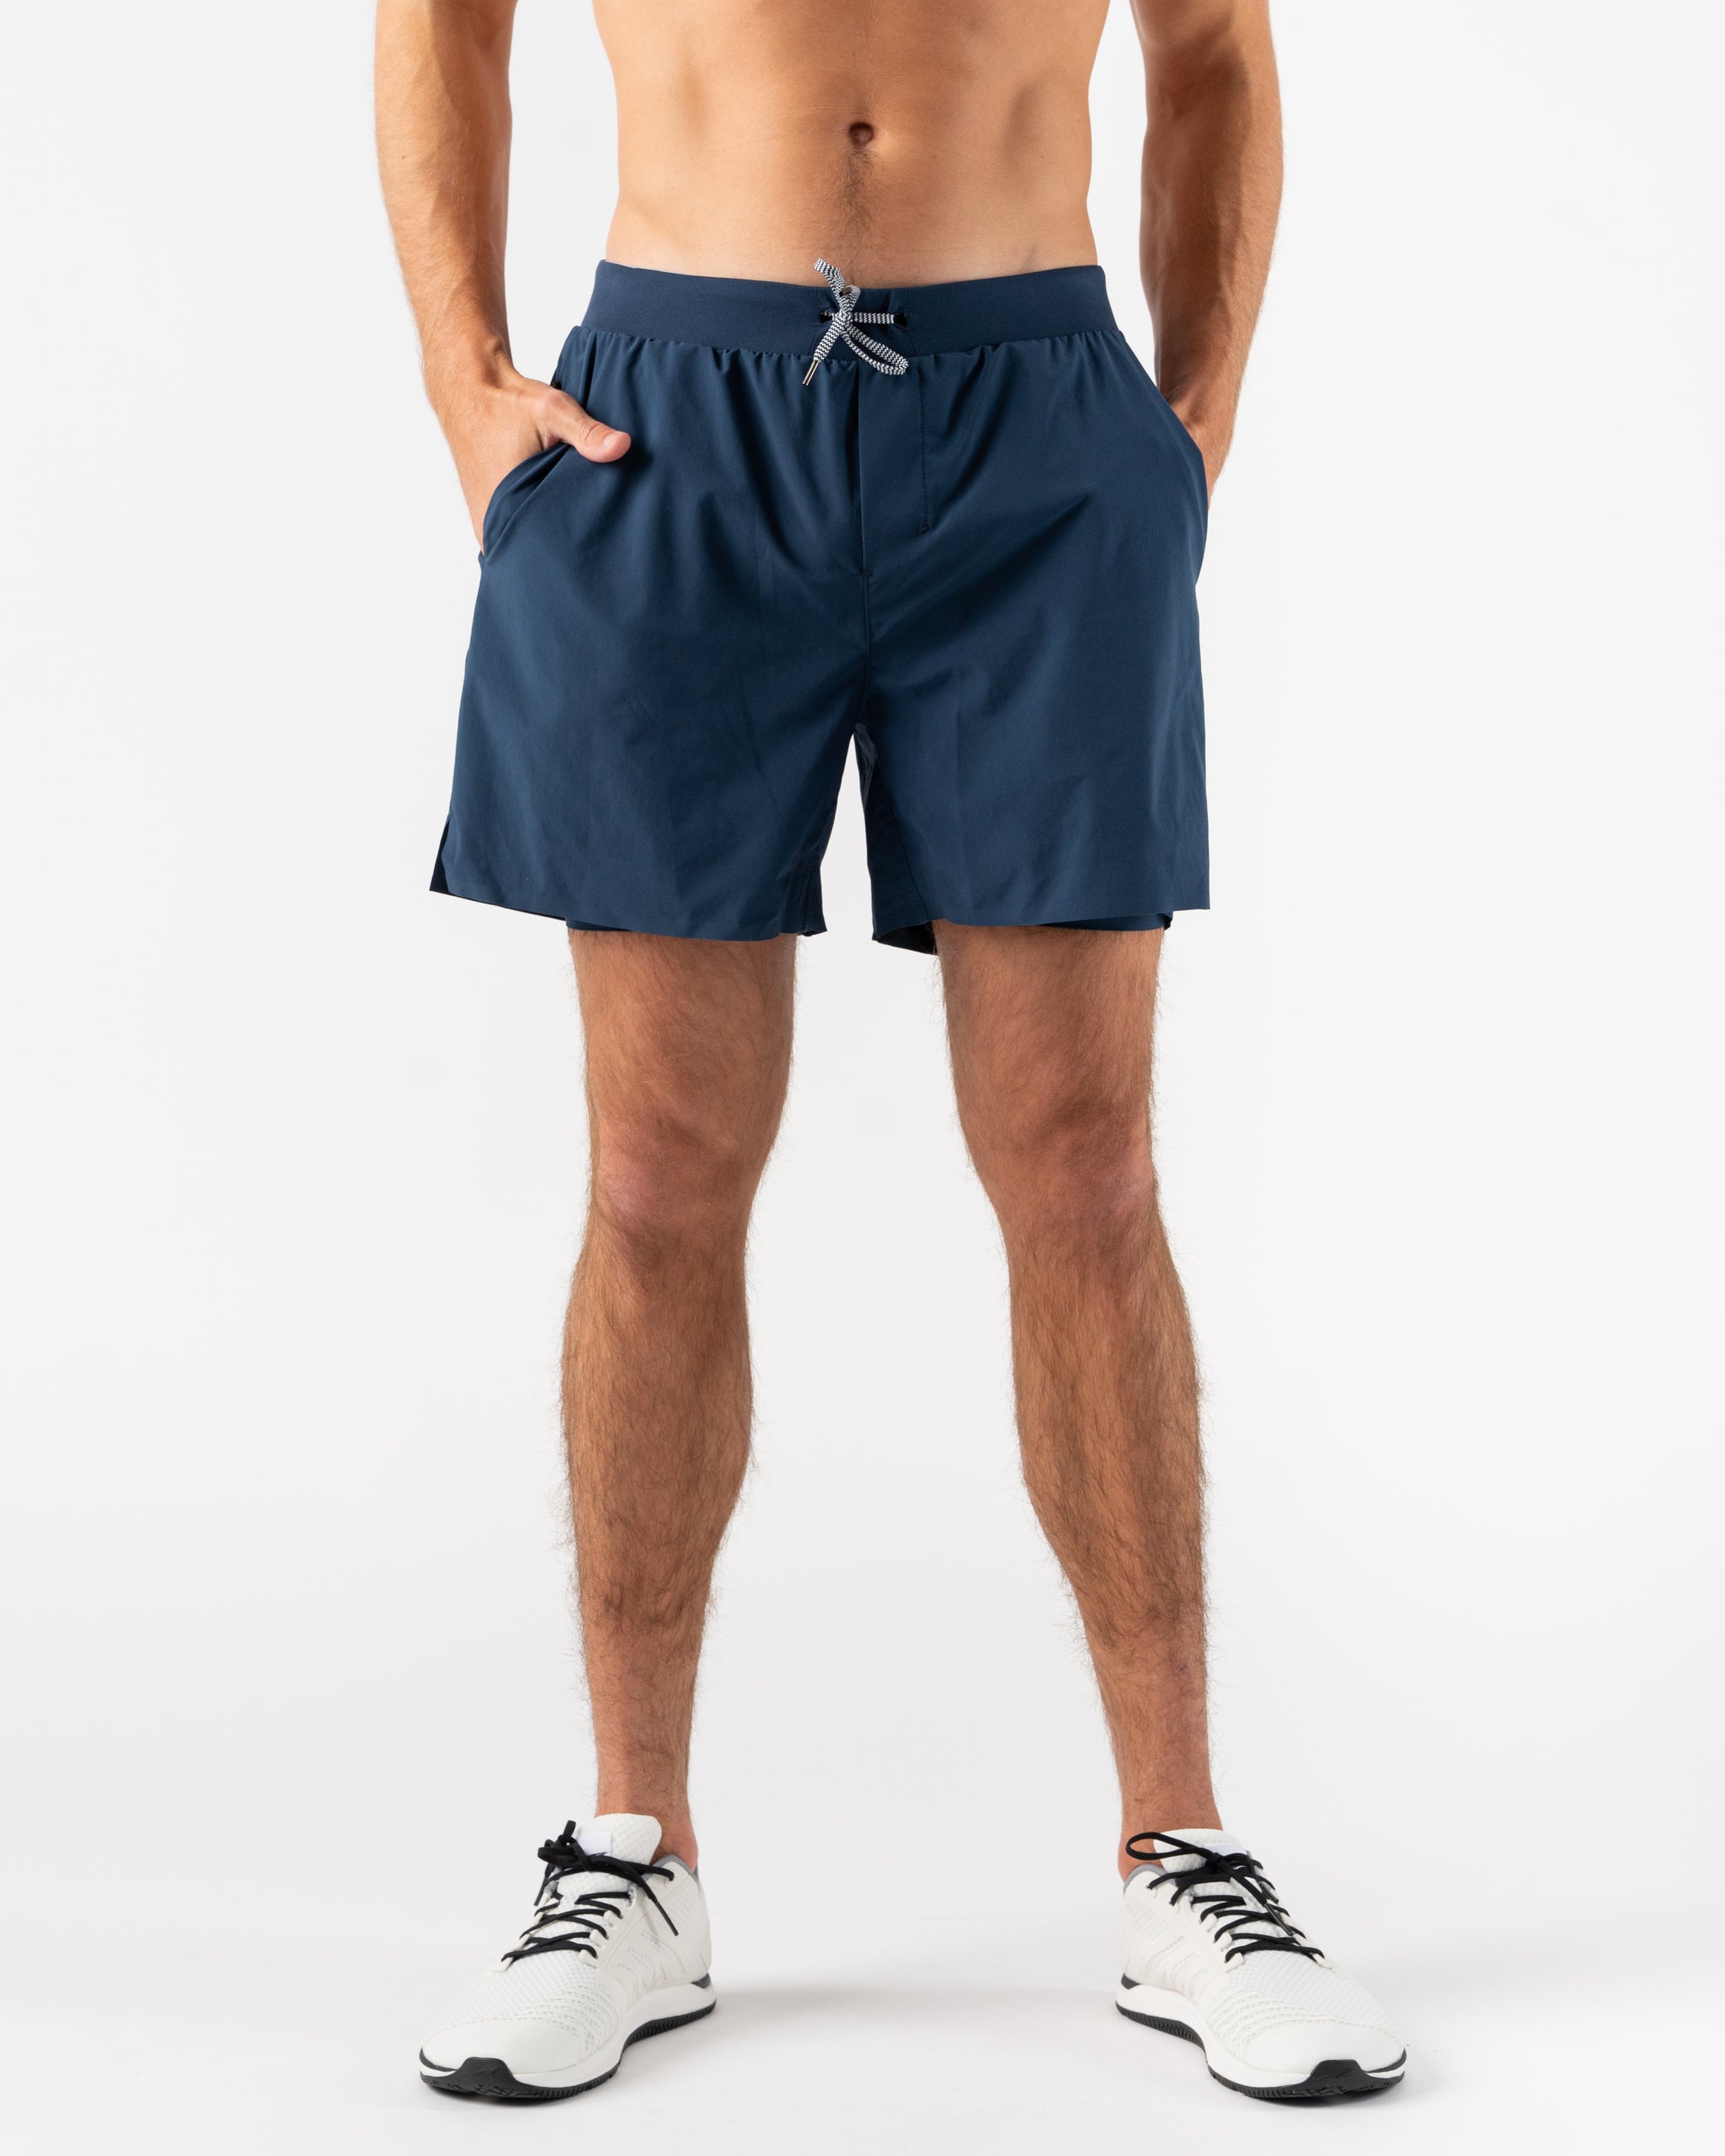 Buy Cultsport Wine & Black Regular Fit Shorts with Inner Tights